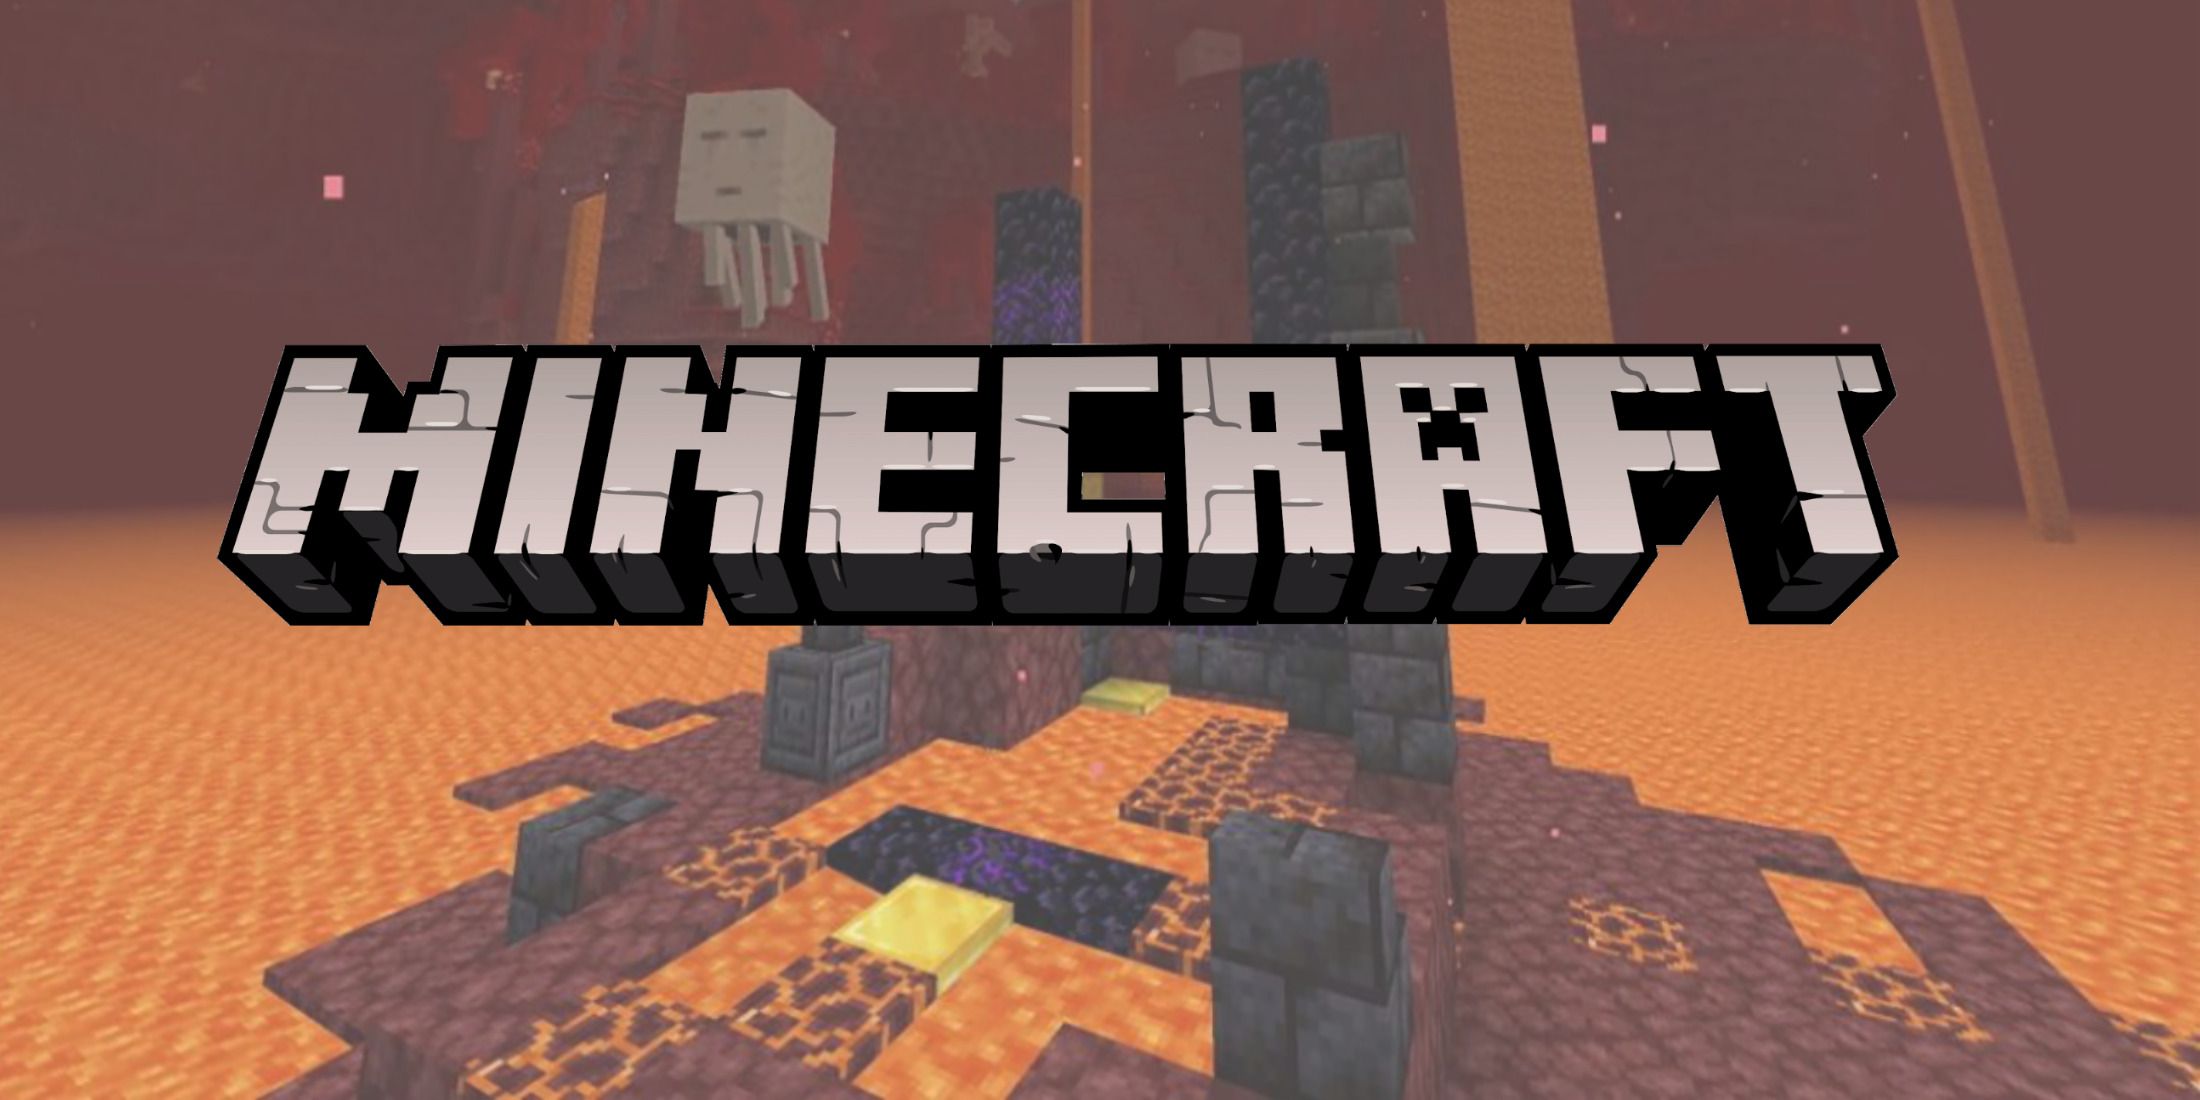 The Nether from Minecraft with the game's logo in front of it.